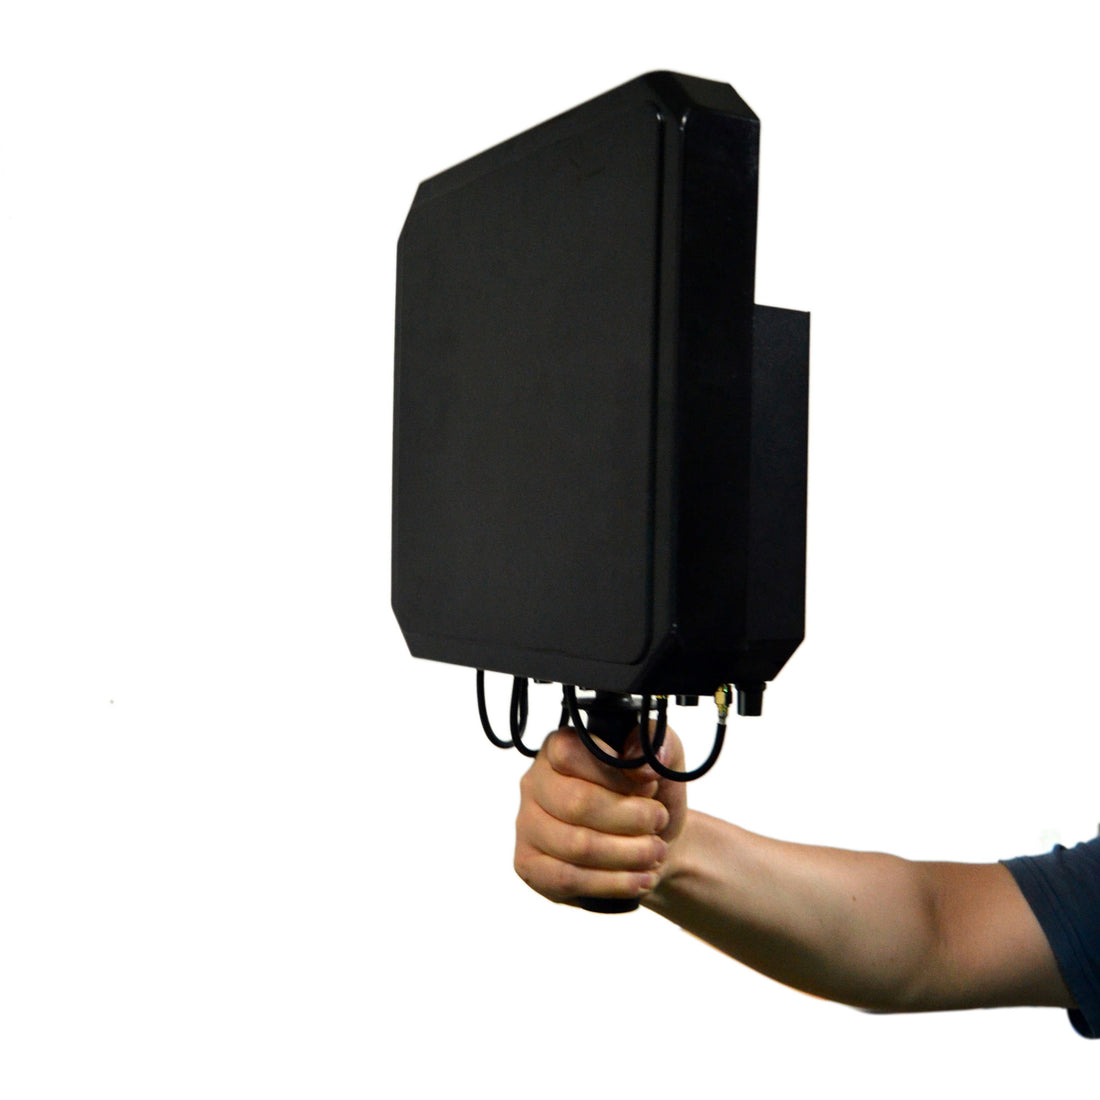 What is the effect of mobile phone jammer?